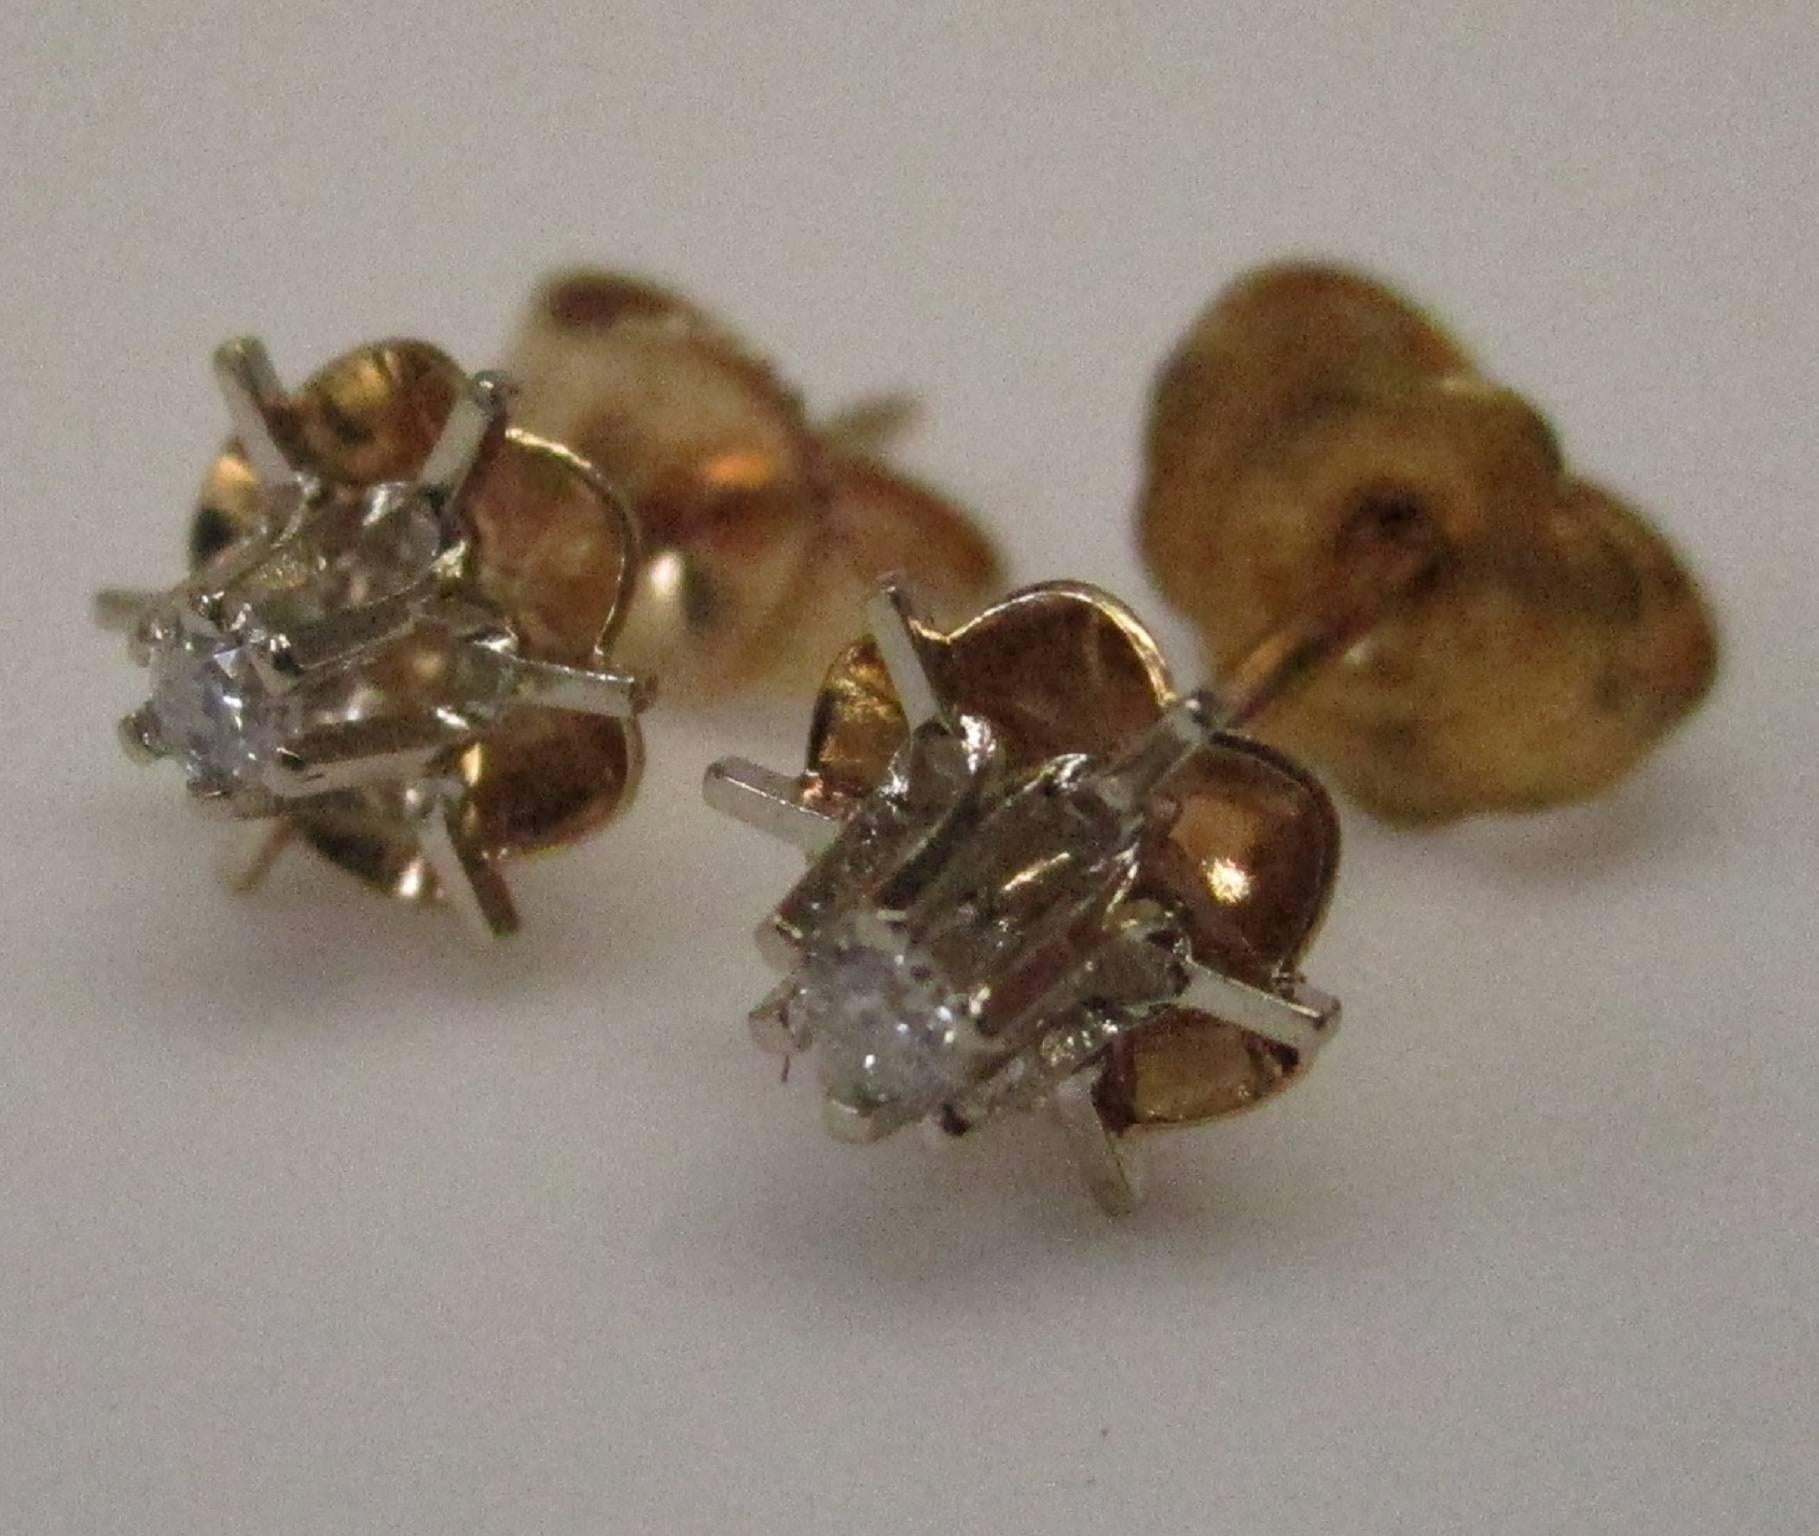 These are precious 14 karat buttercup studs with diamonds, 0.06 carat in total weight, H color, SI clarity. These would make a great everyday pair of earrings, light and easy to wear.

St. John & Myers Jewelry is the only jeweler in Central